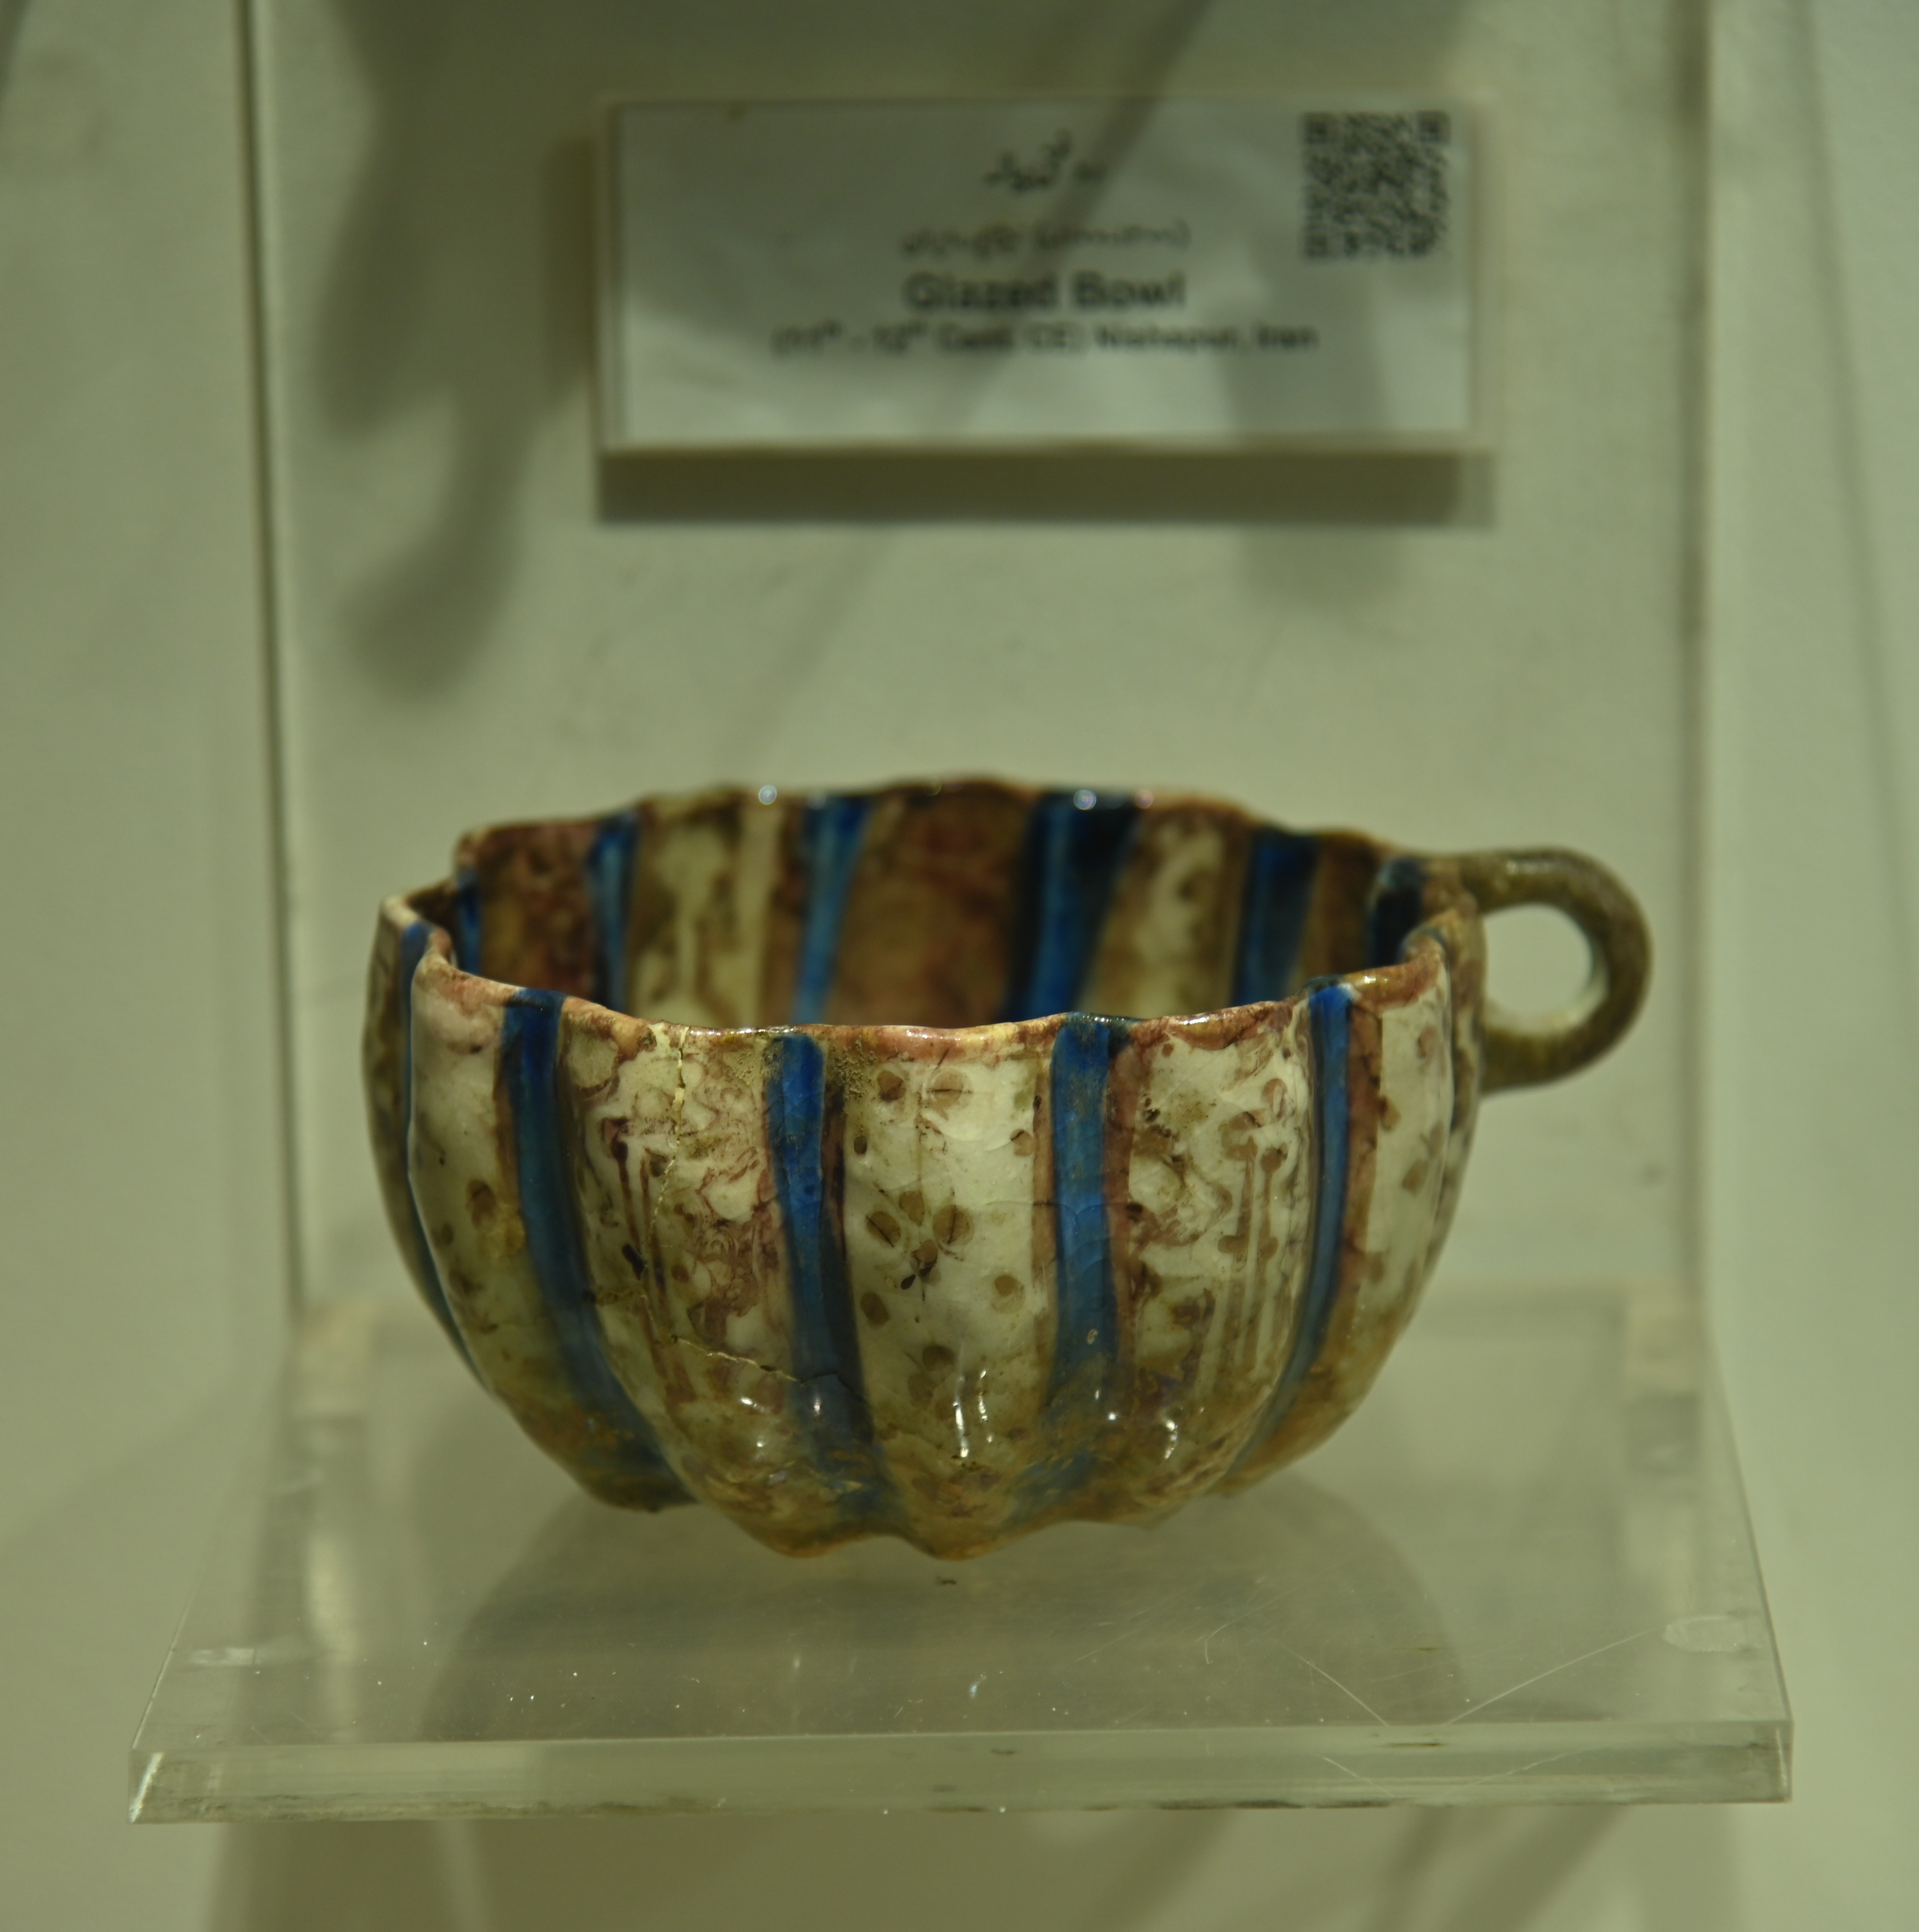 The Glazed Bowl displayed at the Sir Syed Memorial Museum